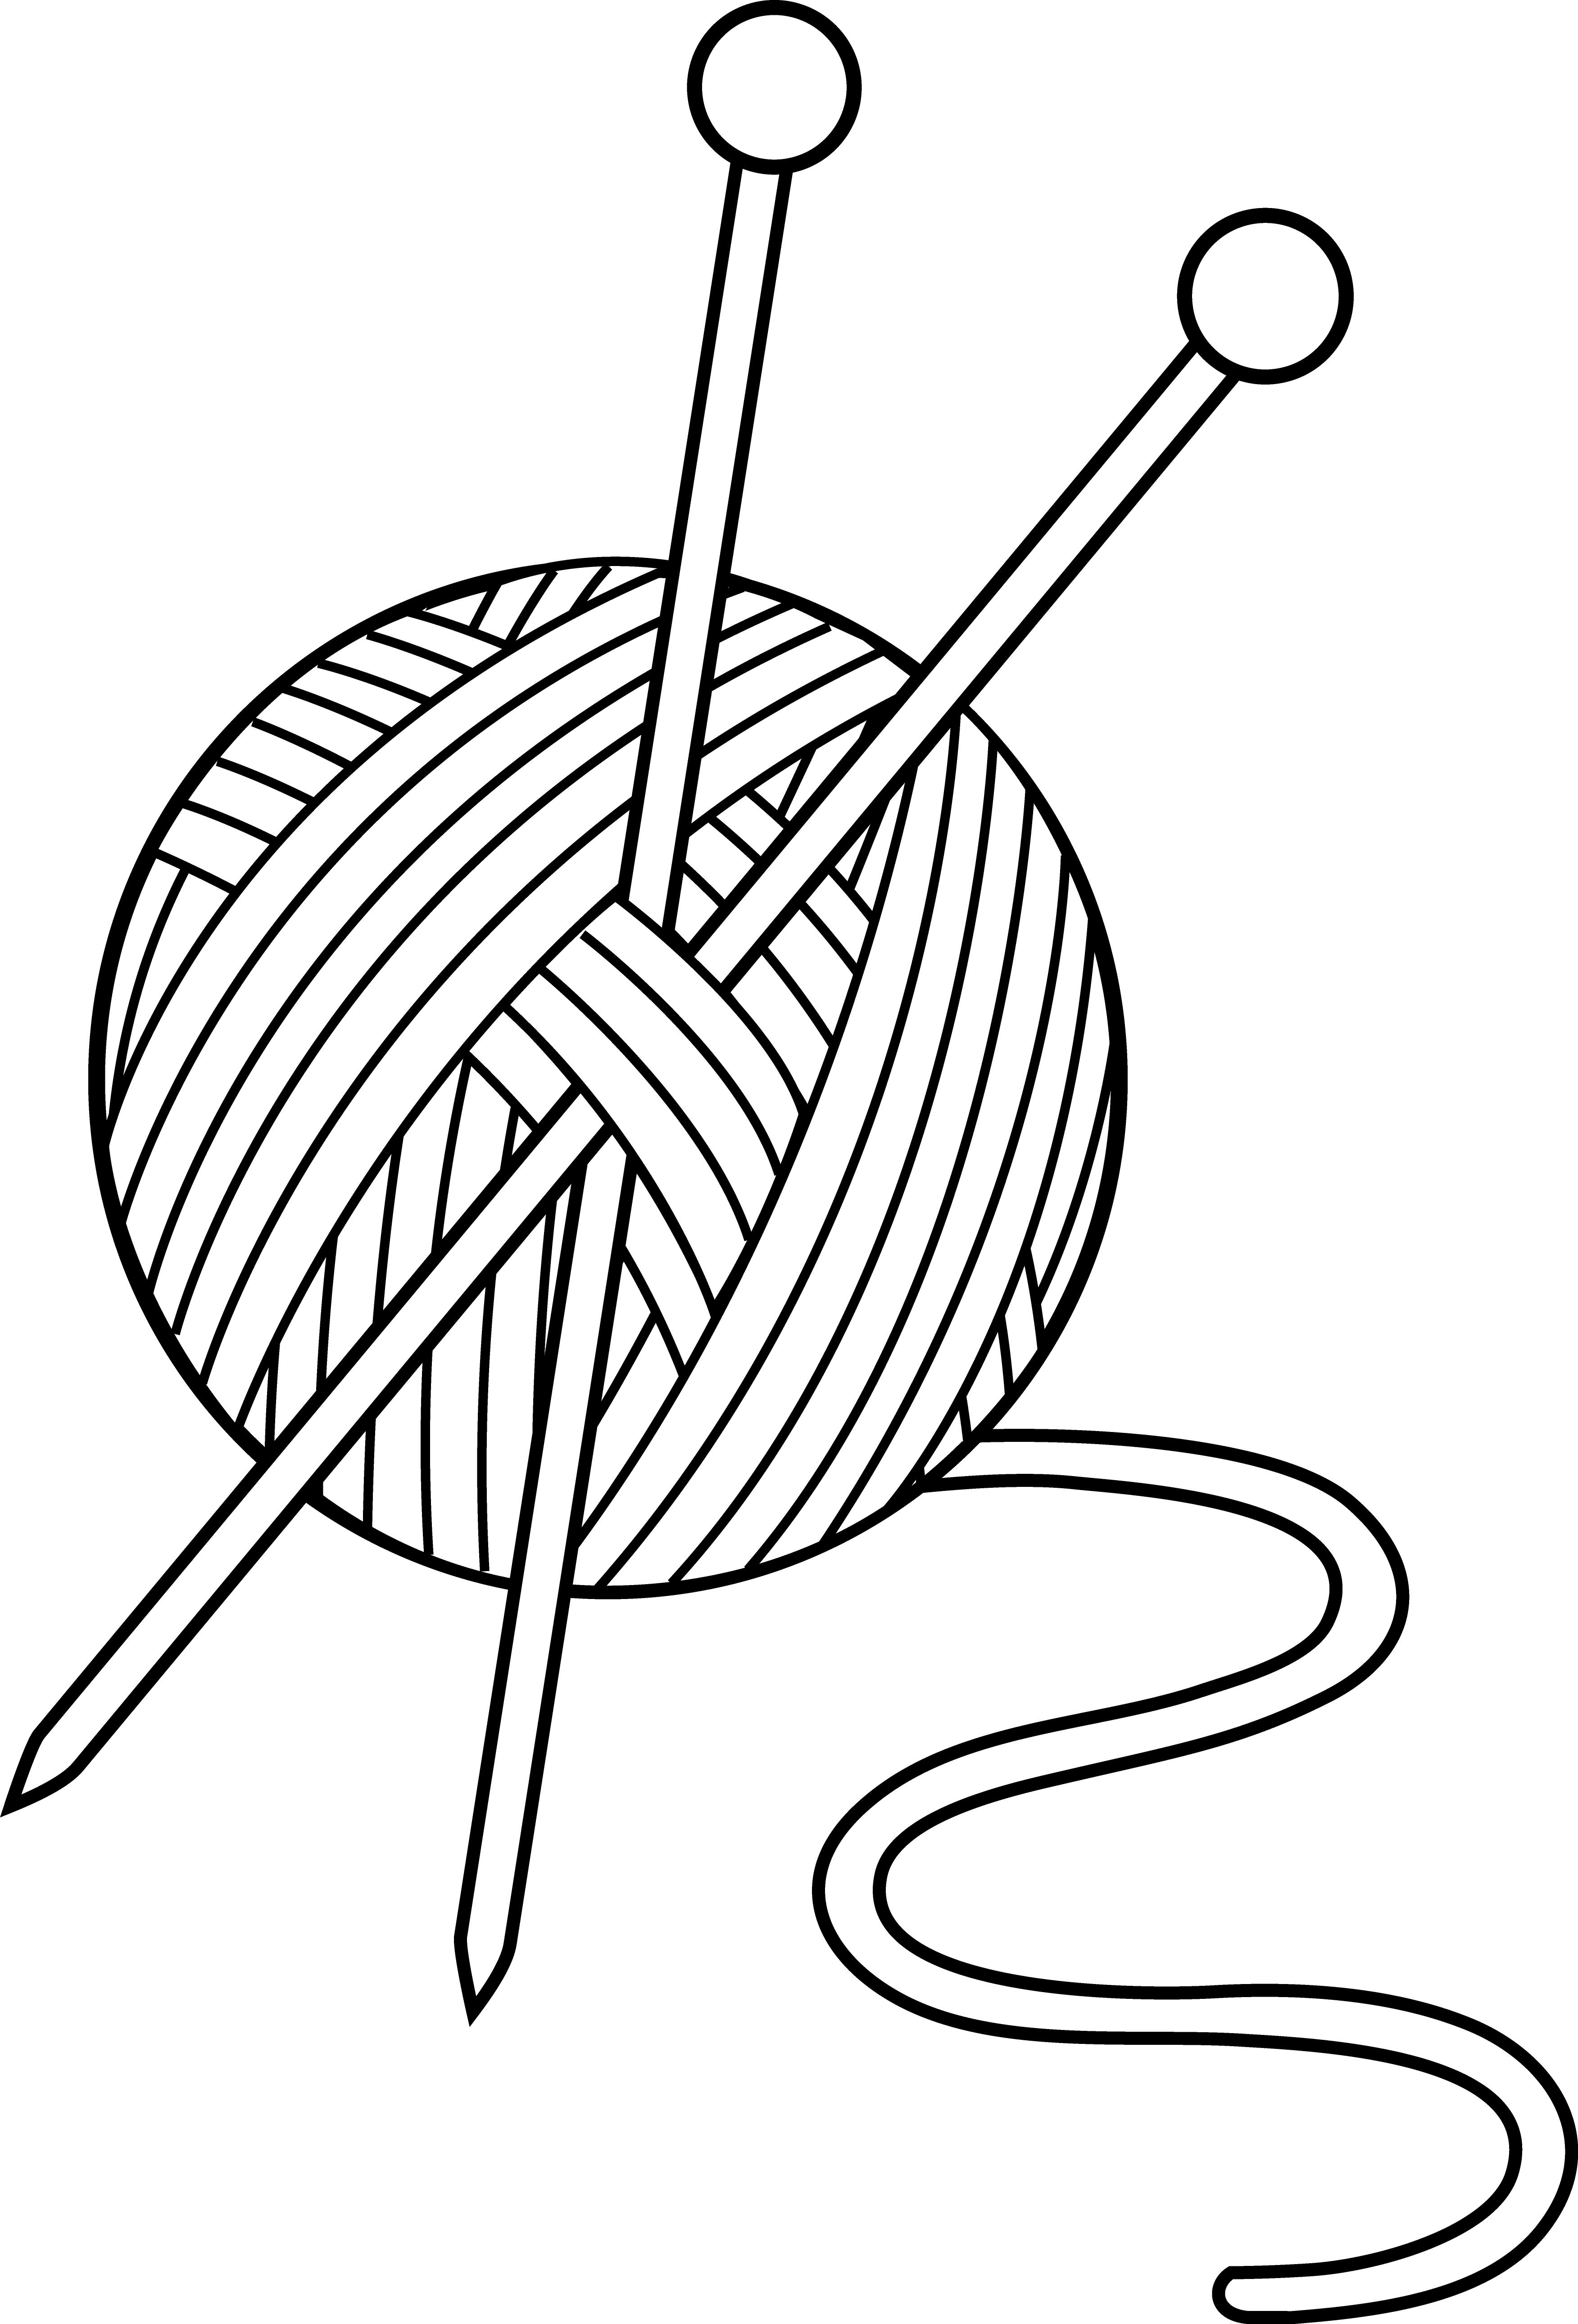 Knitting set free clip. Medicine clipart black and white